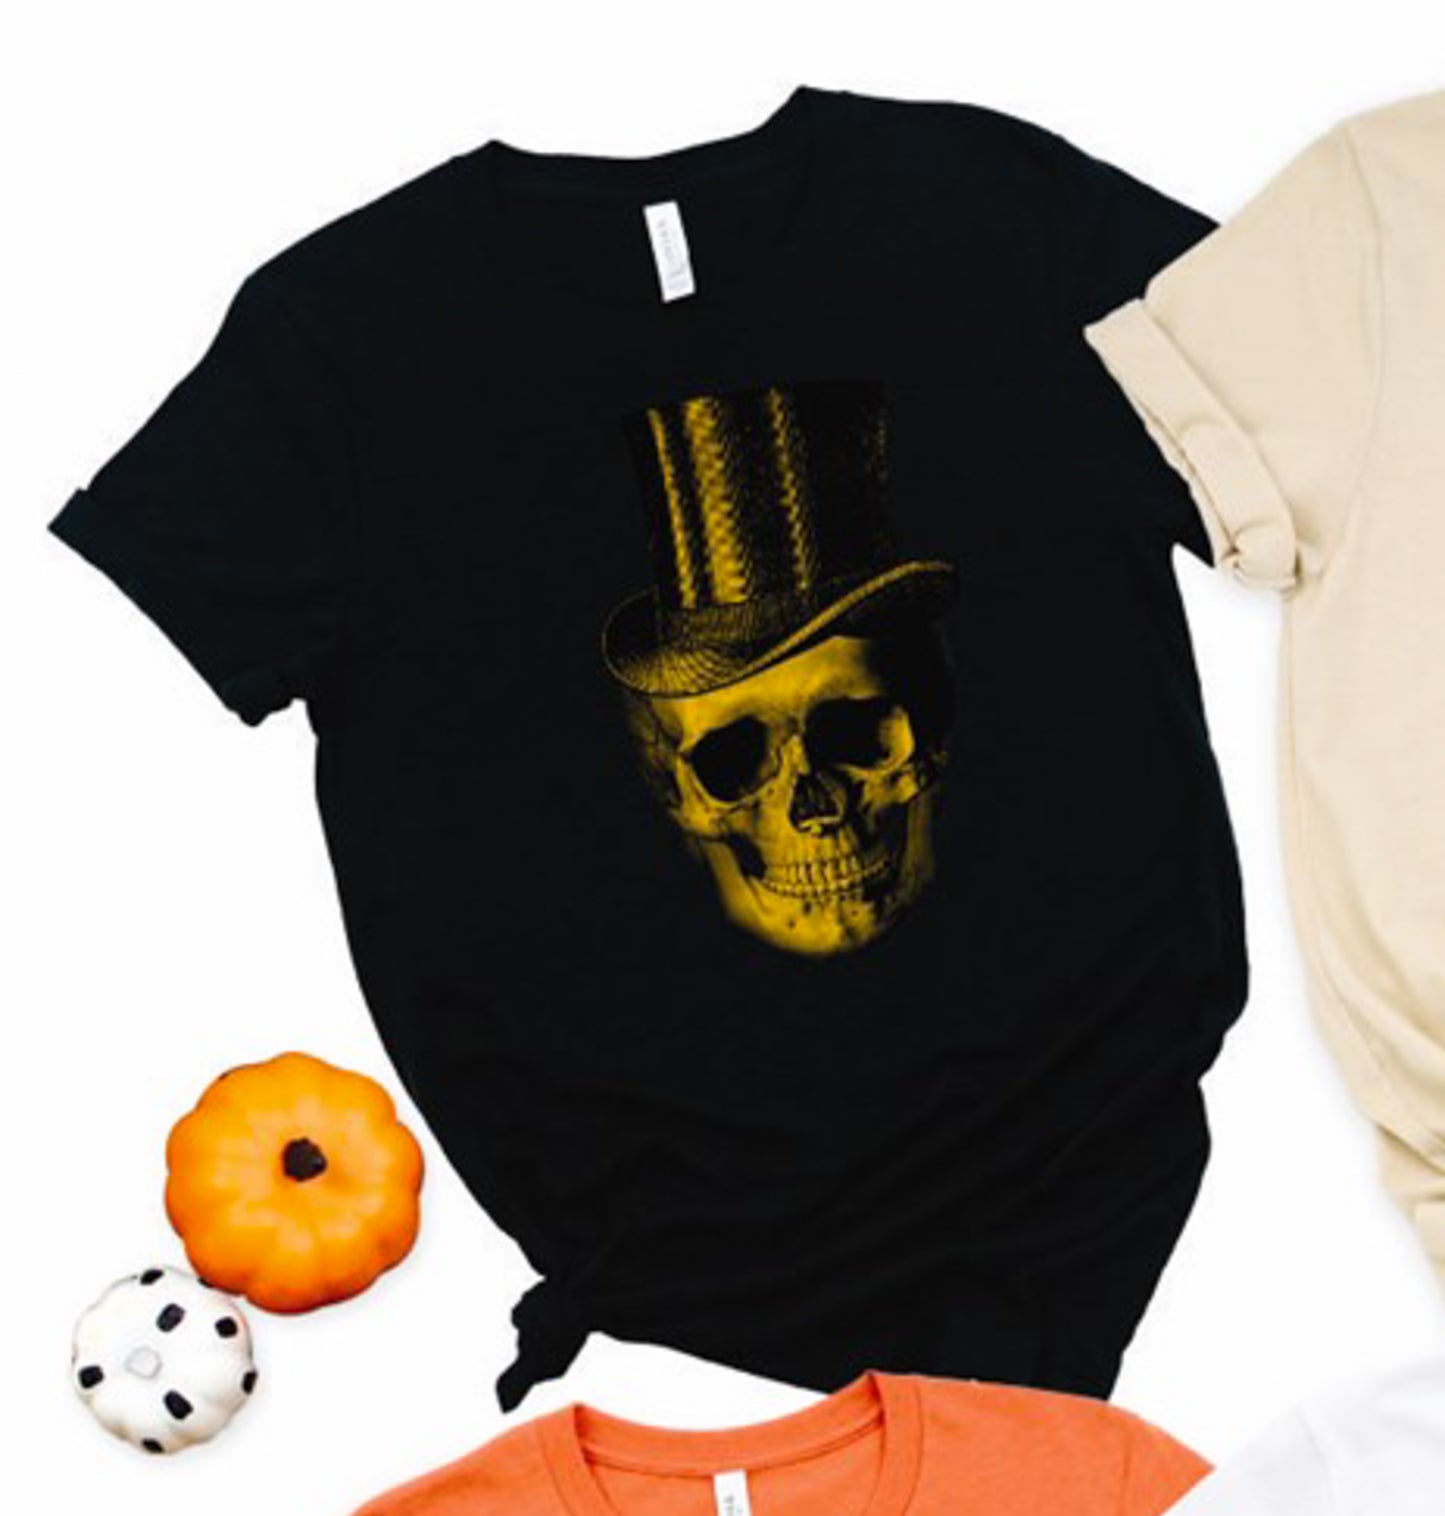 Skull With Top Hat Tee